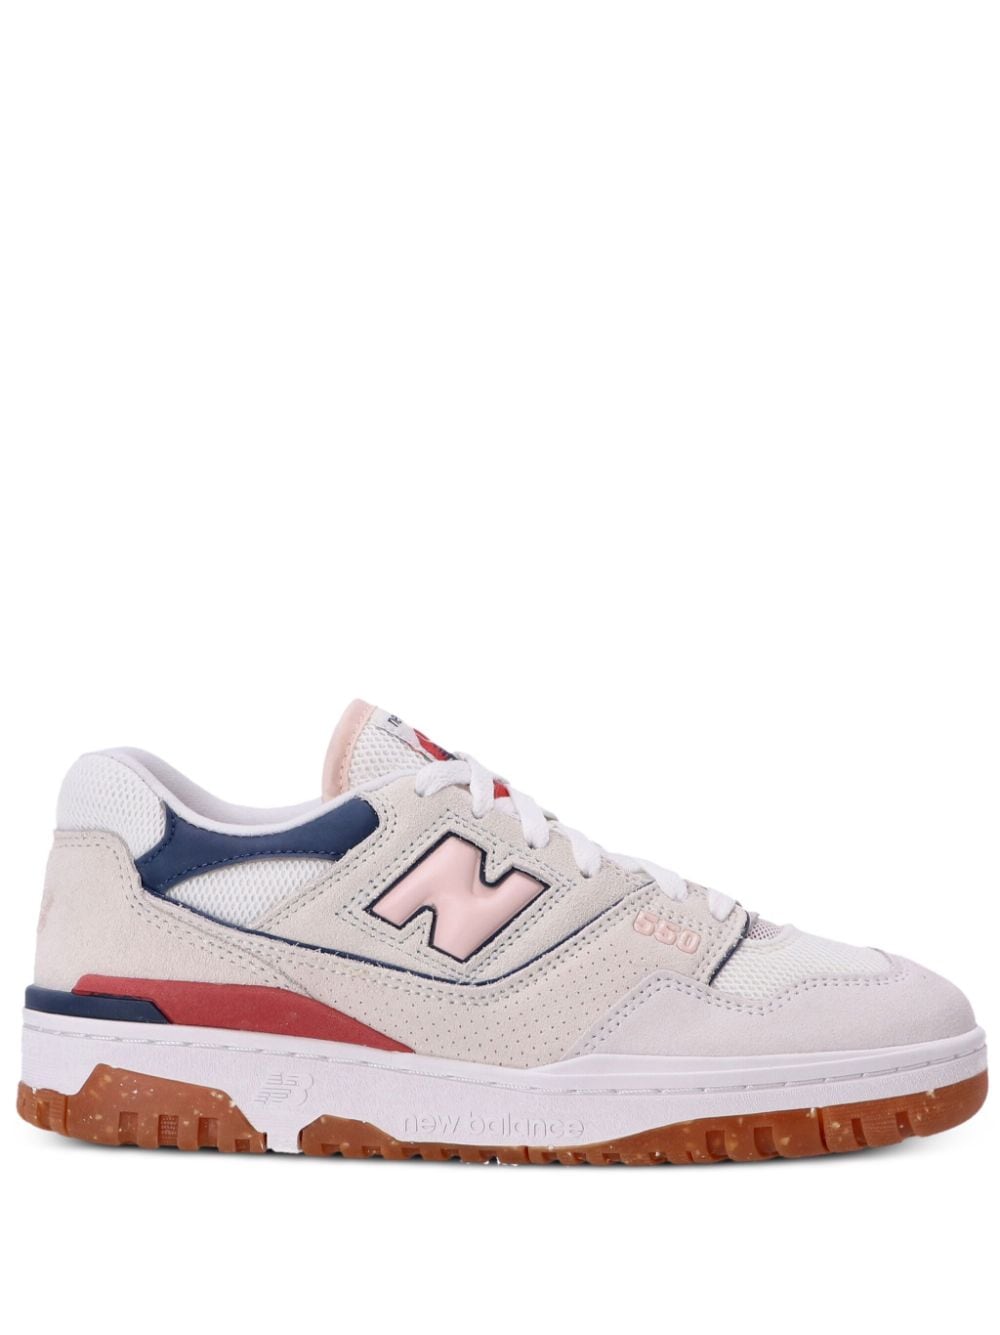 New Balance 550 leather sneakers - White